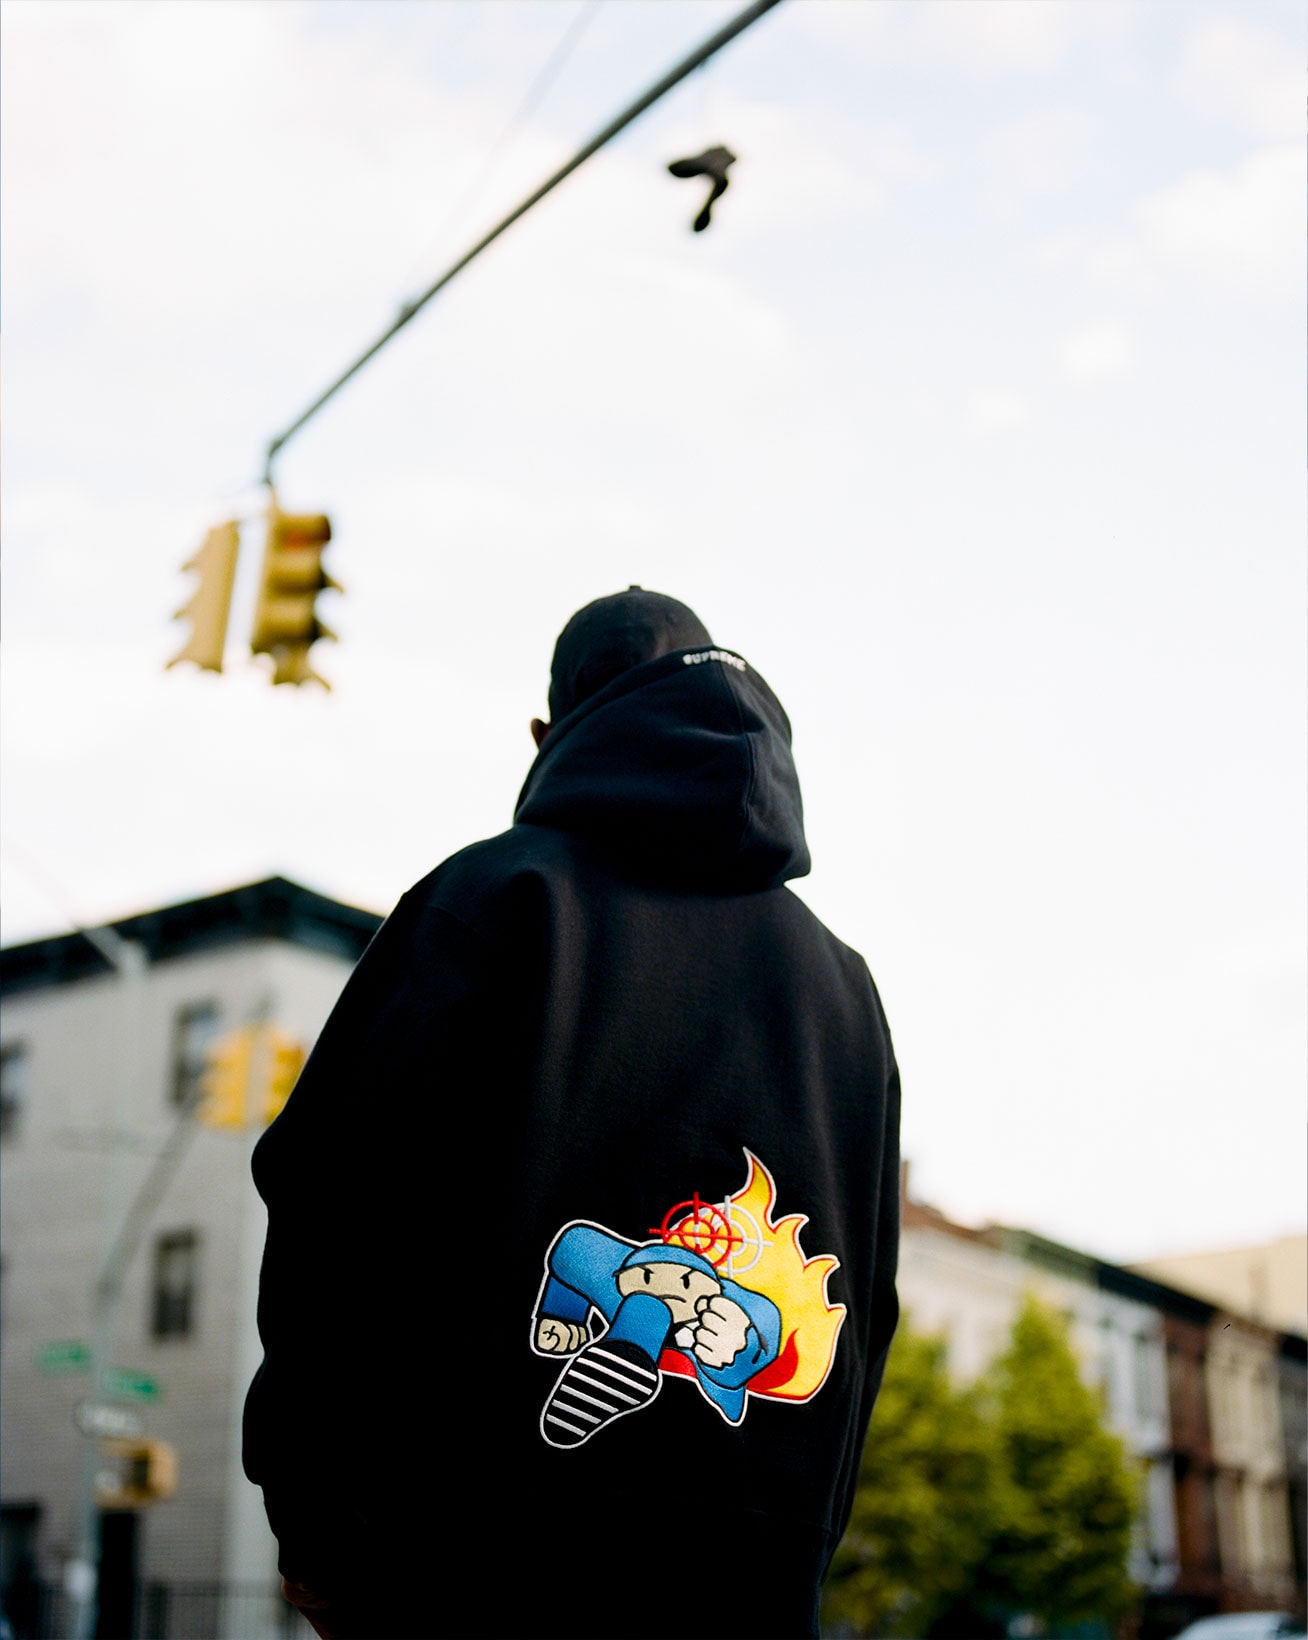 Supreme Duck Down Records Fall Collaboration Hoodies Beanies Playlist Release Info